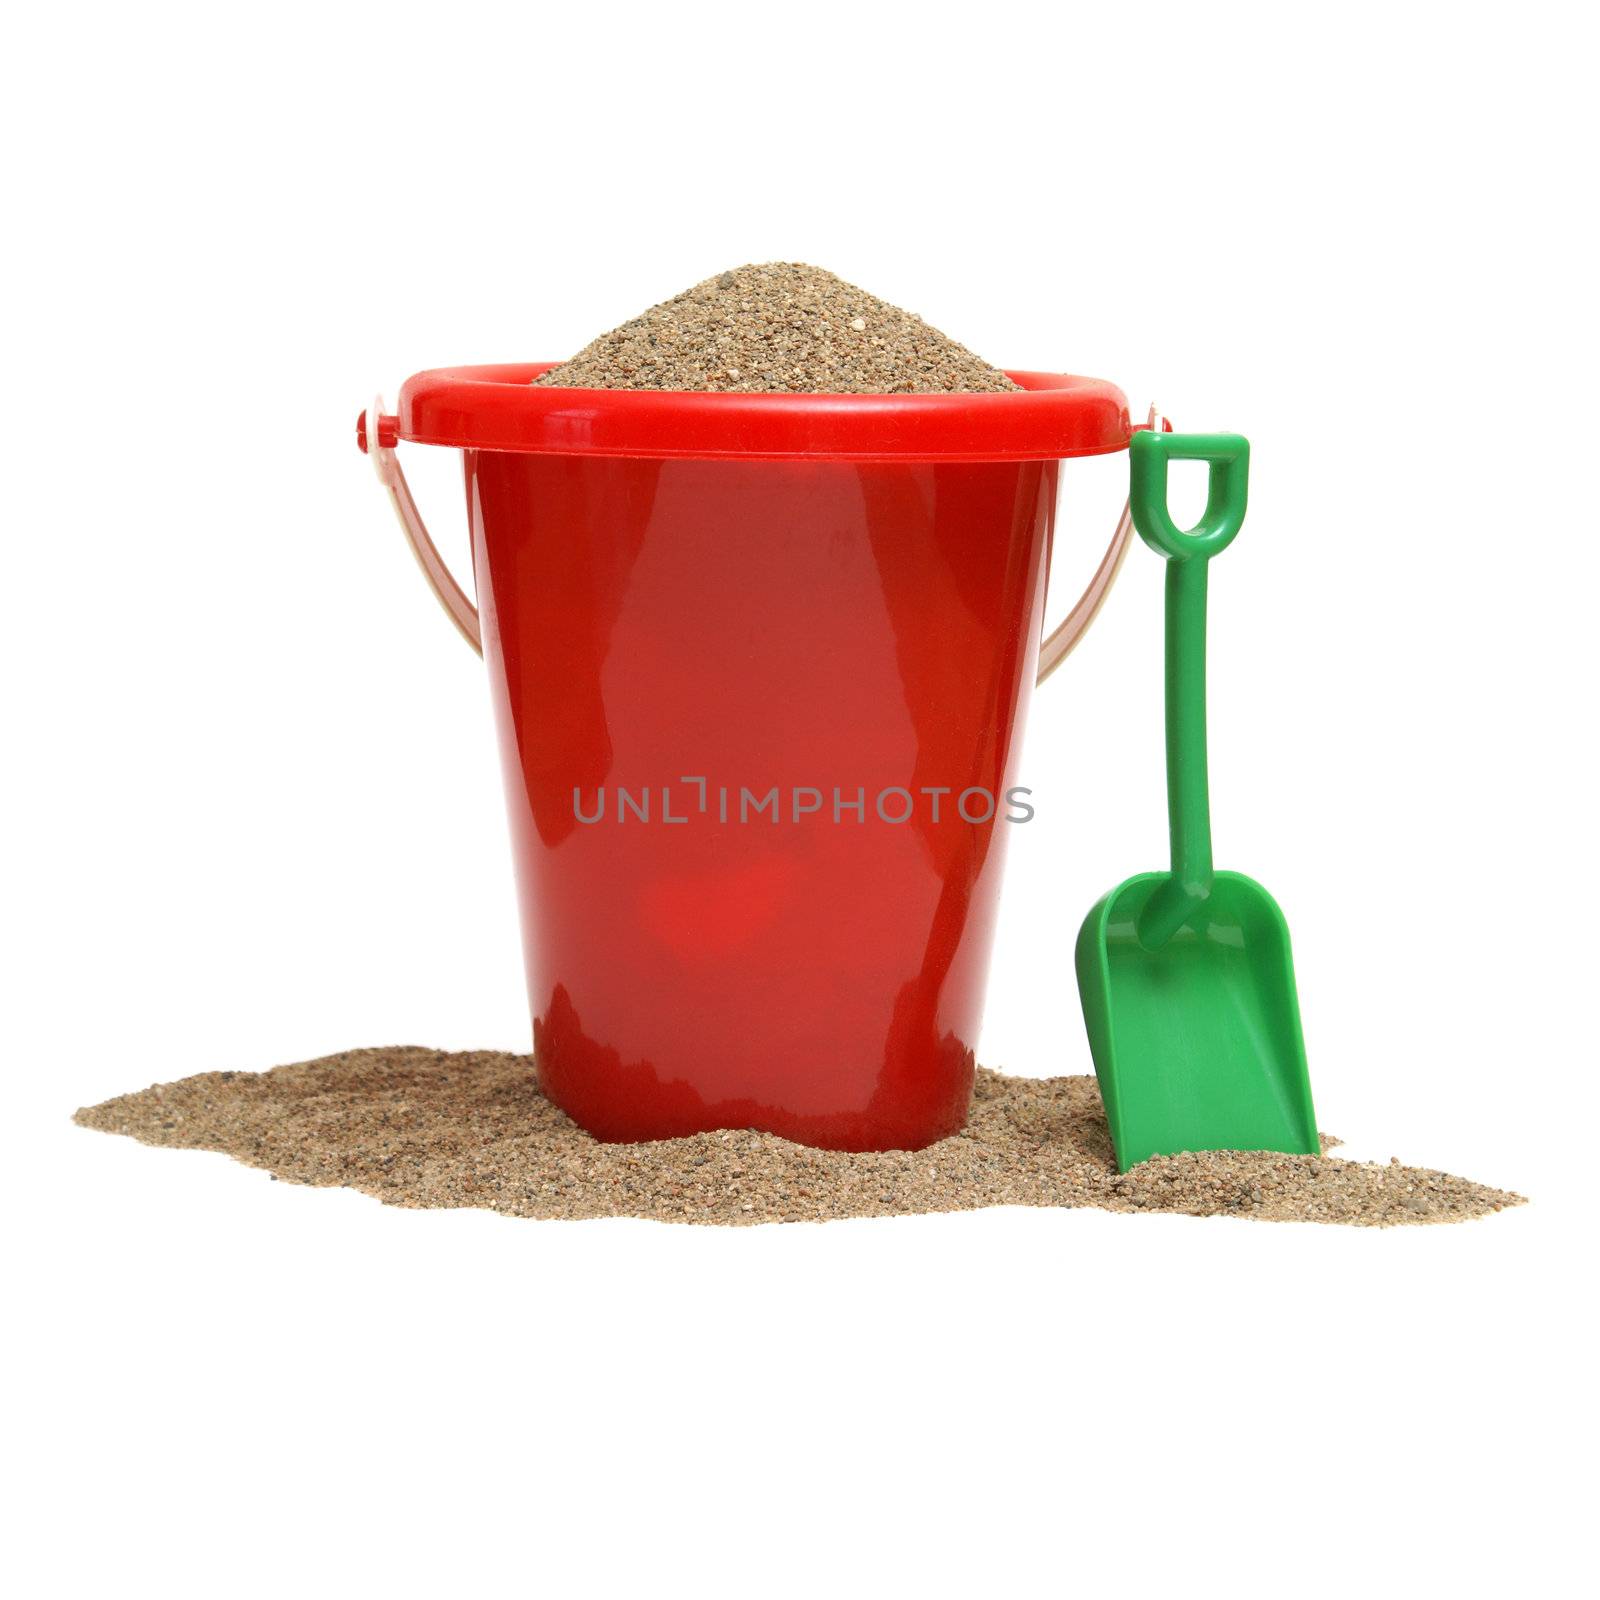 An isolated shot of a bucket of sand for the childrens play time either on vacation, at the beach, or just at home in the sandbox.